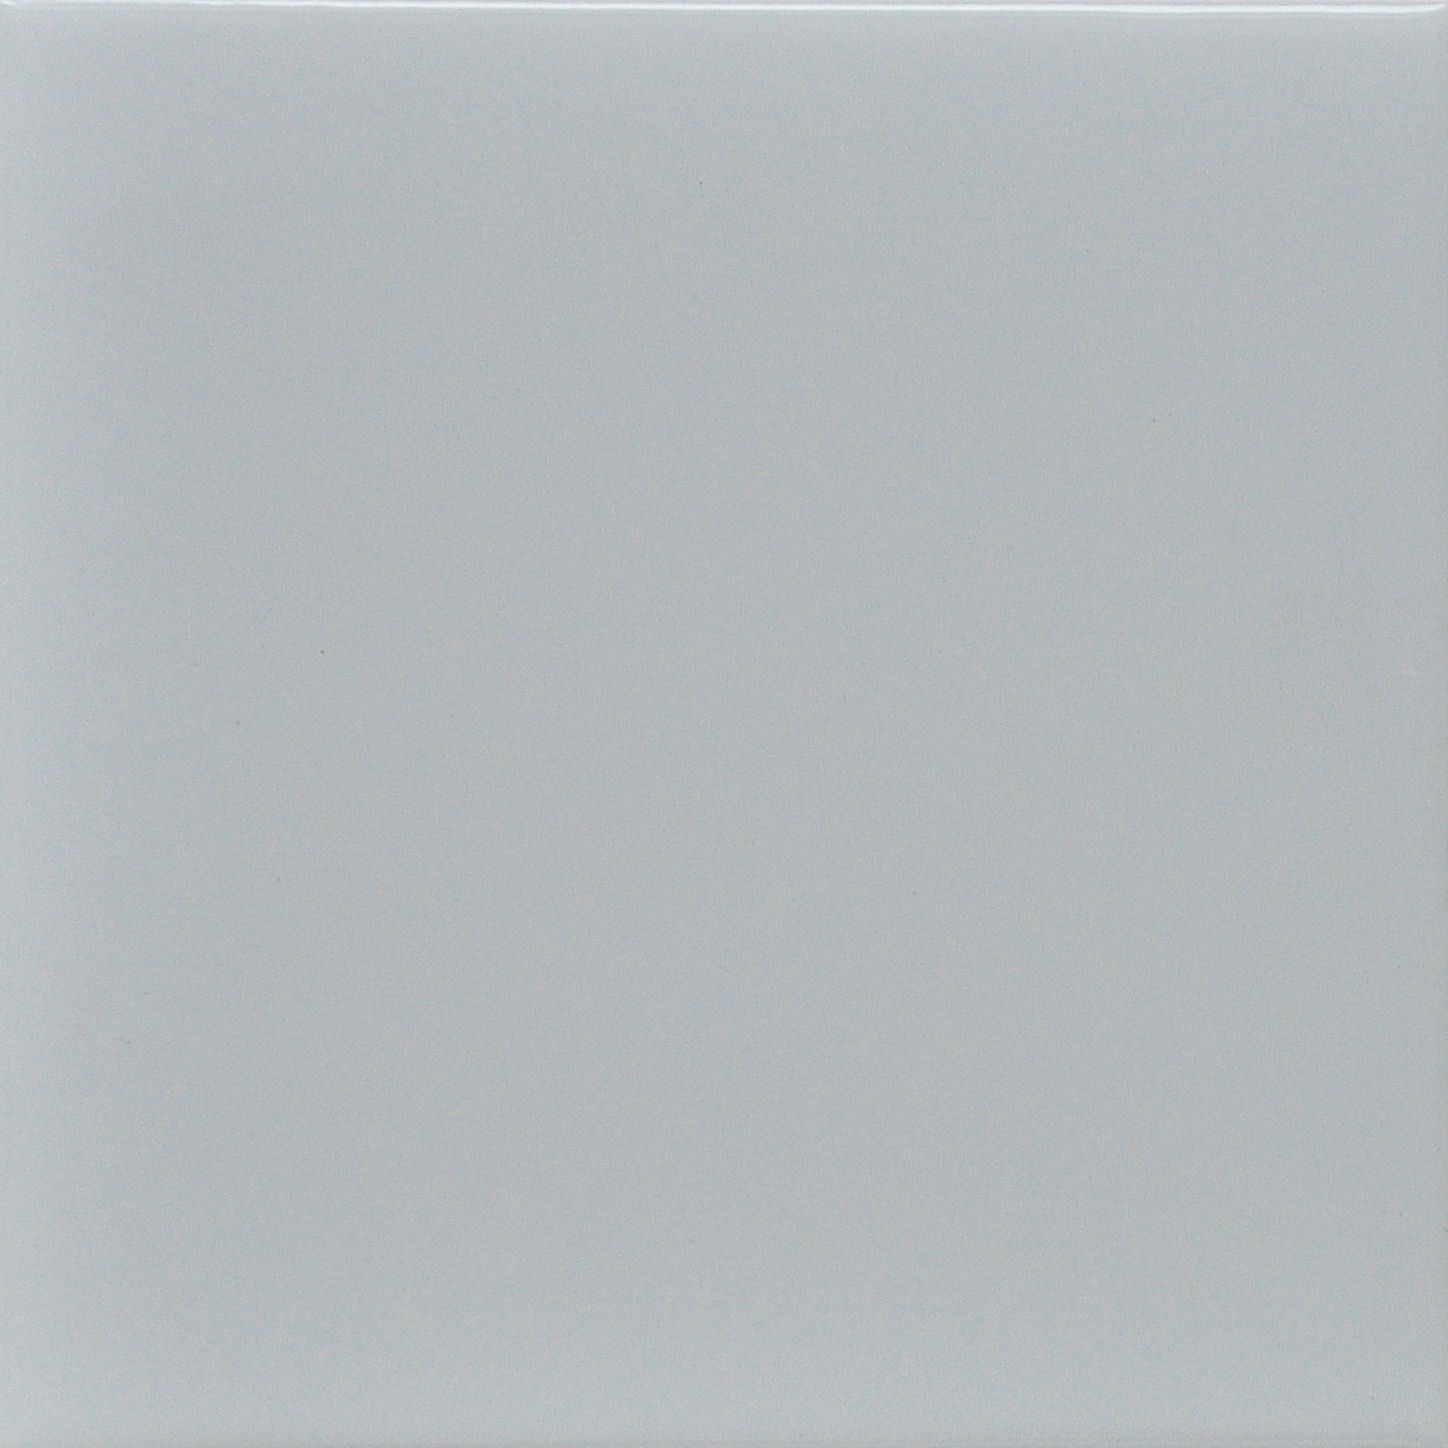 Stokes 150mm x 150mm Pale Grey